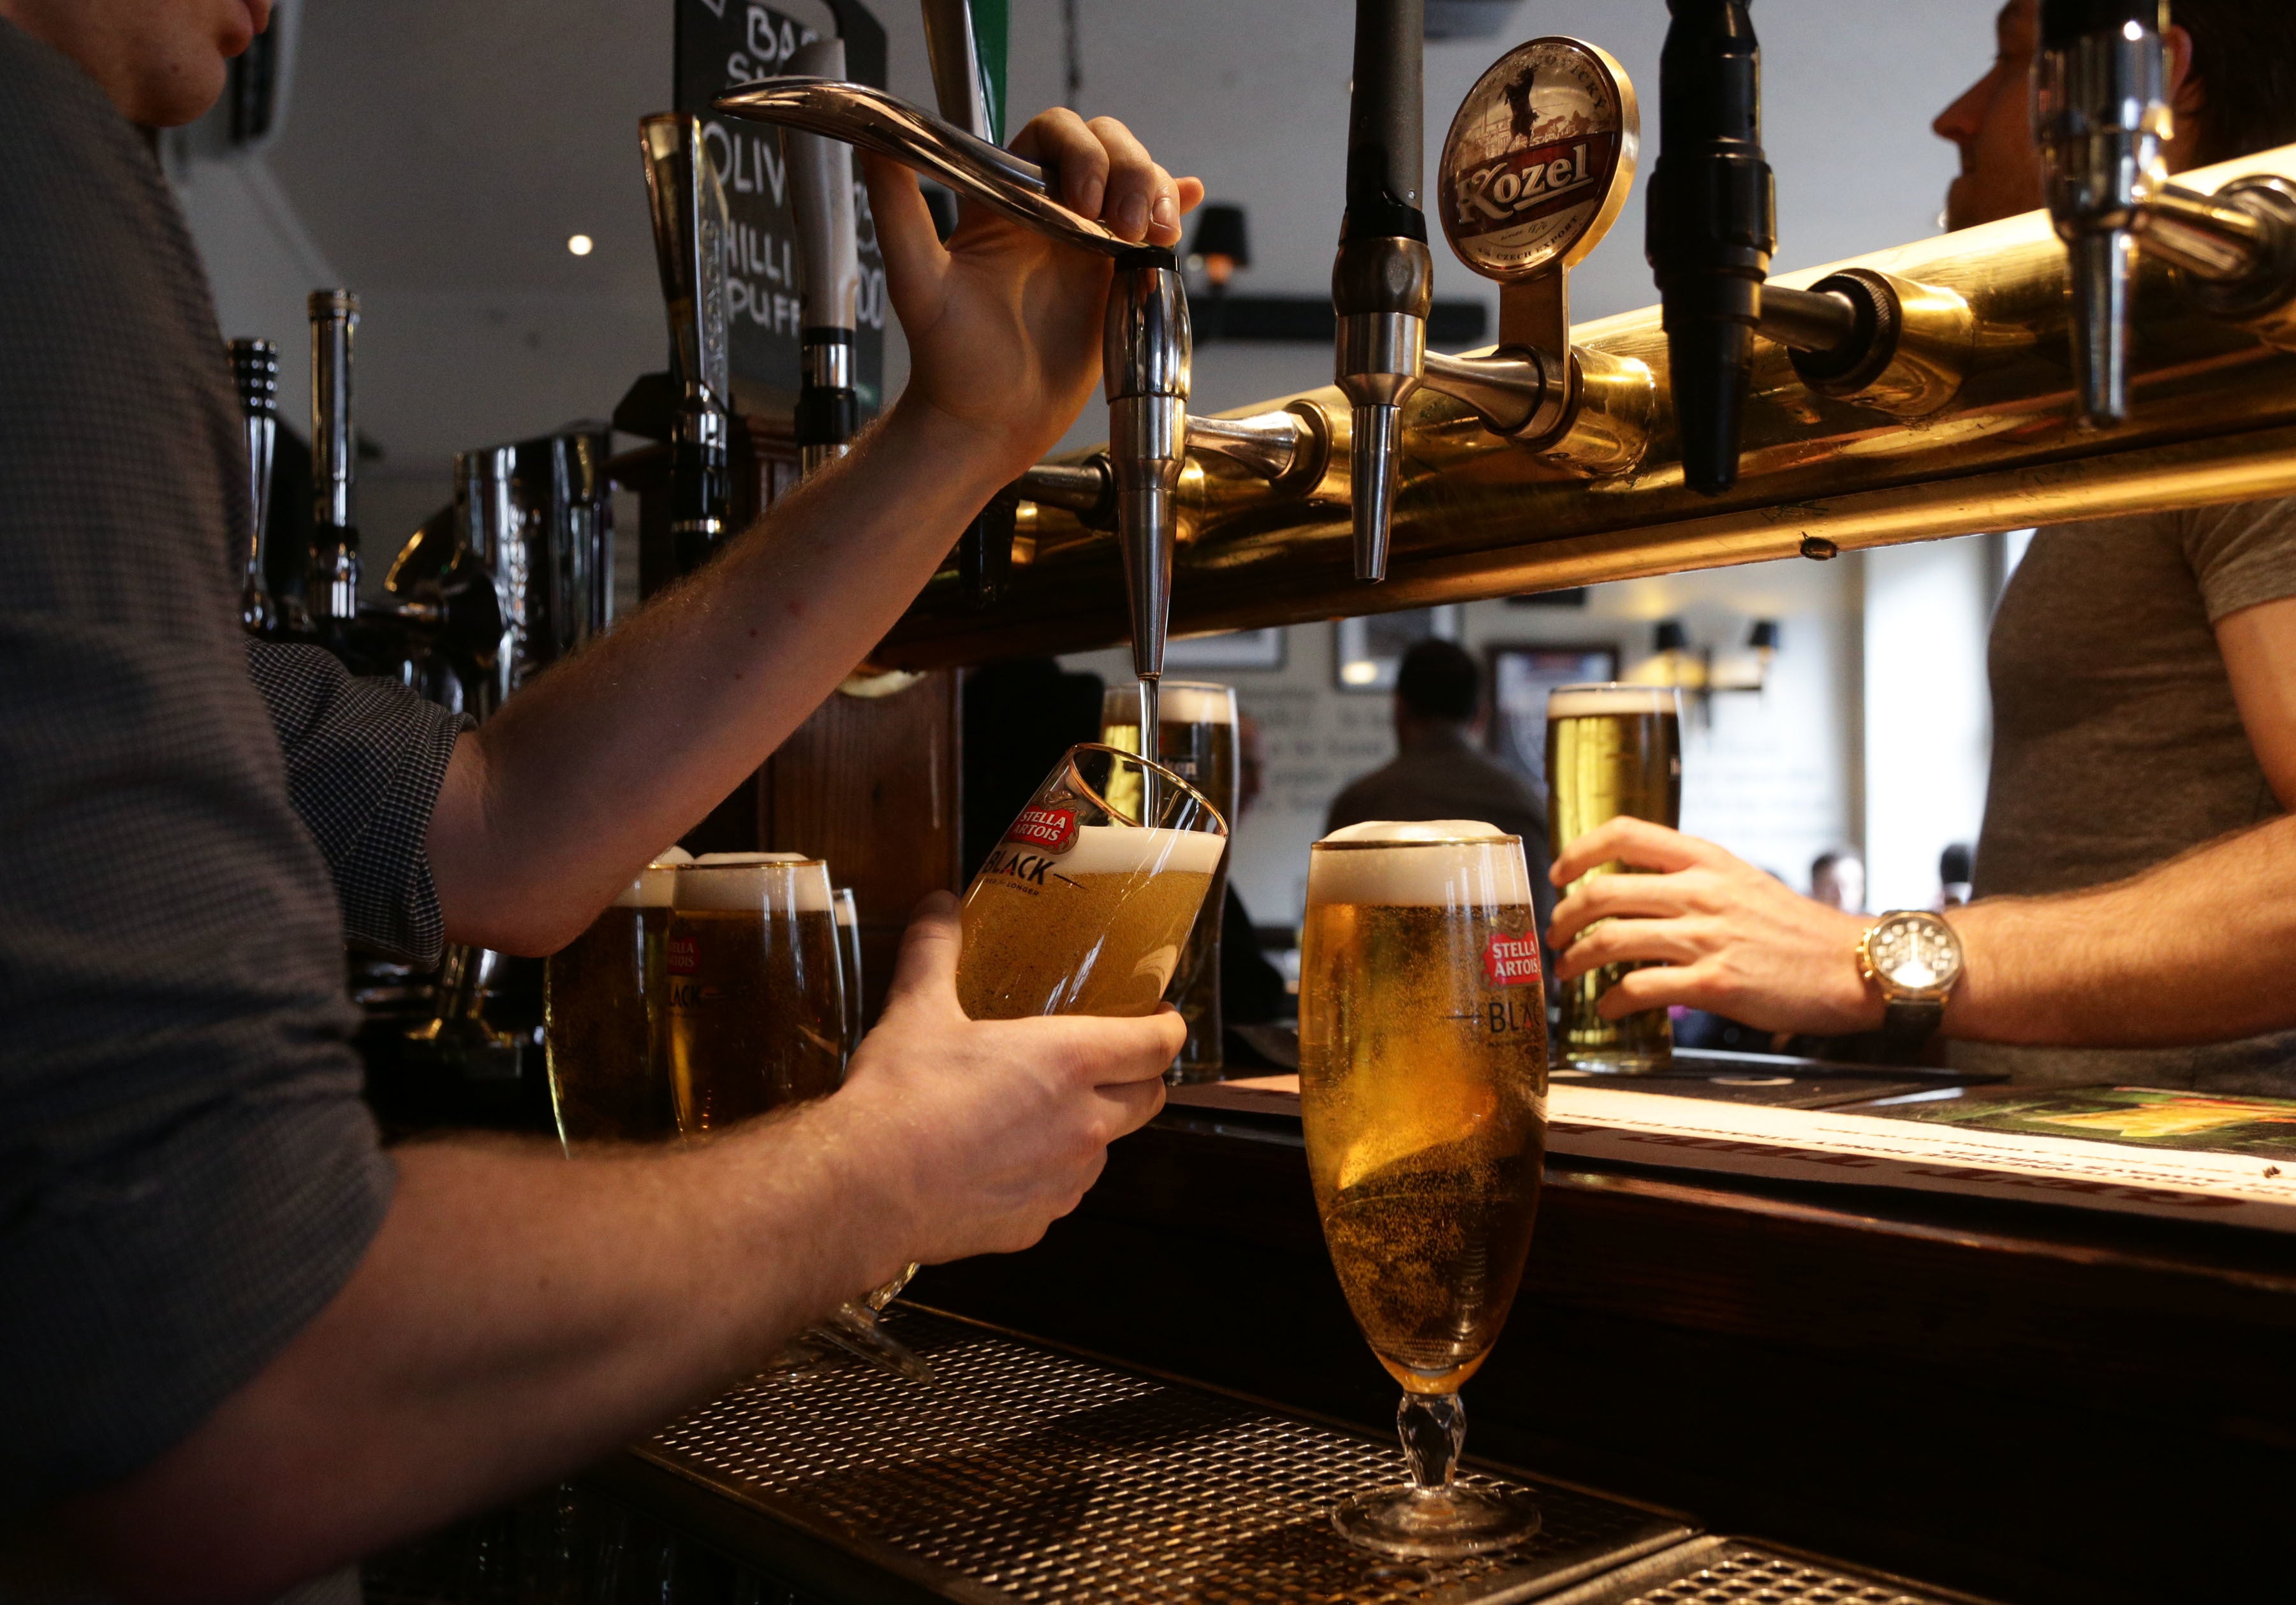 Soaring energy prices could see many pubs and breweries forced to close